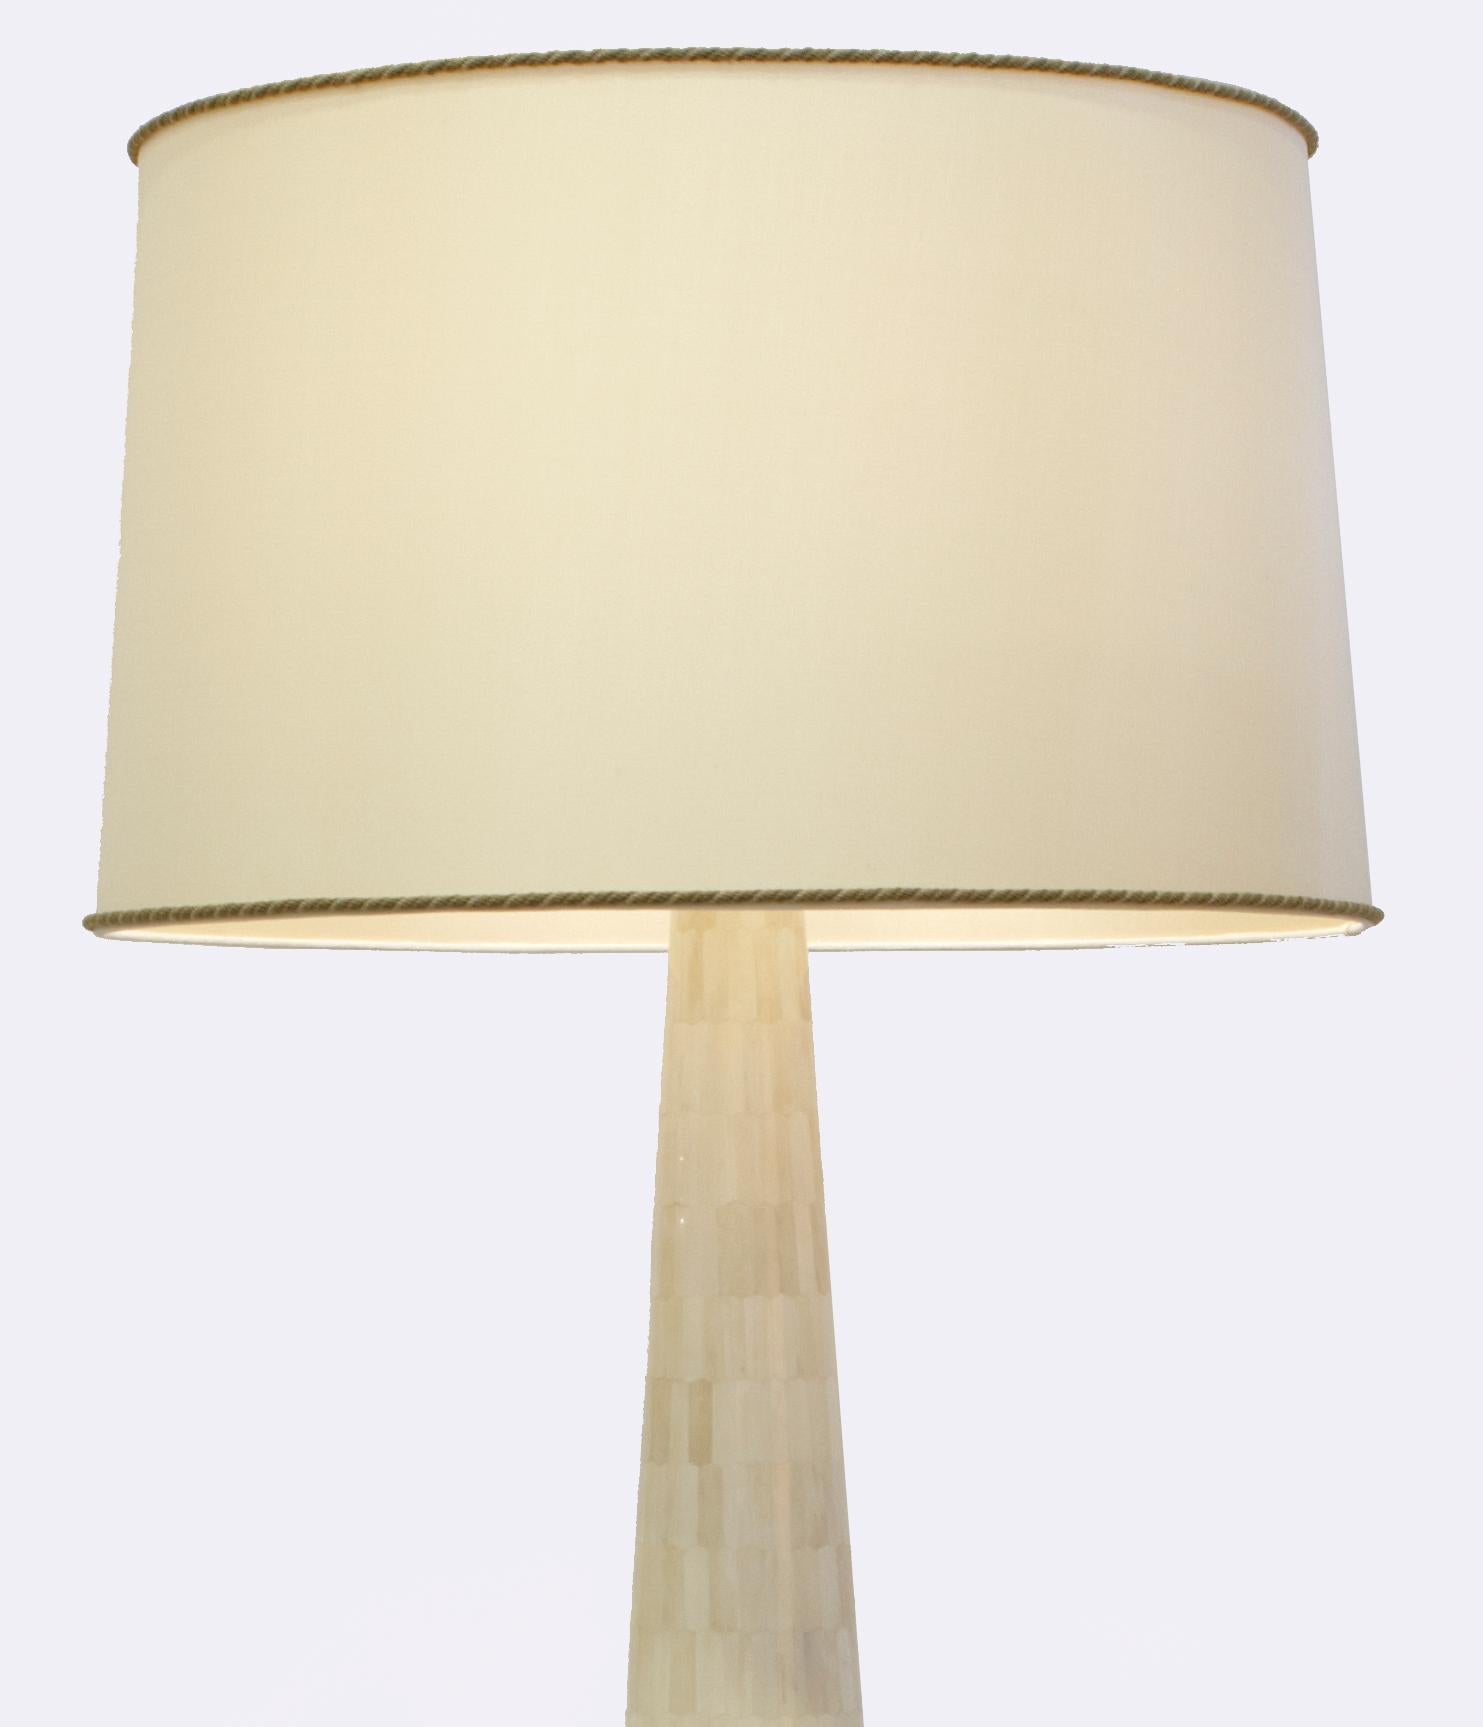 There are certain pieces that command attention in a room and this floor lamp, with its hexagonal camel bone chips inlaid over wood, is one such piece. A blend of artful design and masterful craftsmanship, this lamp  infuses the space with a serene,